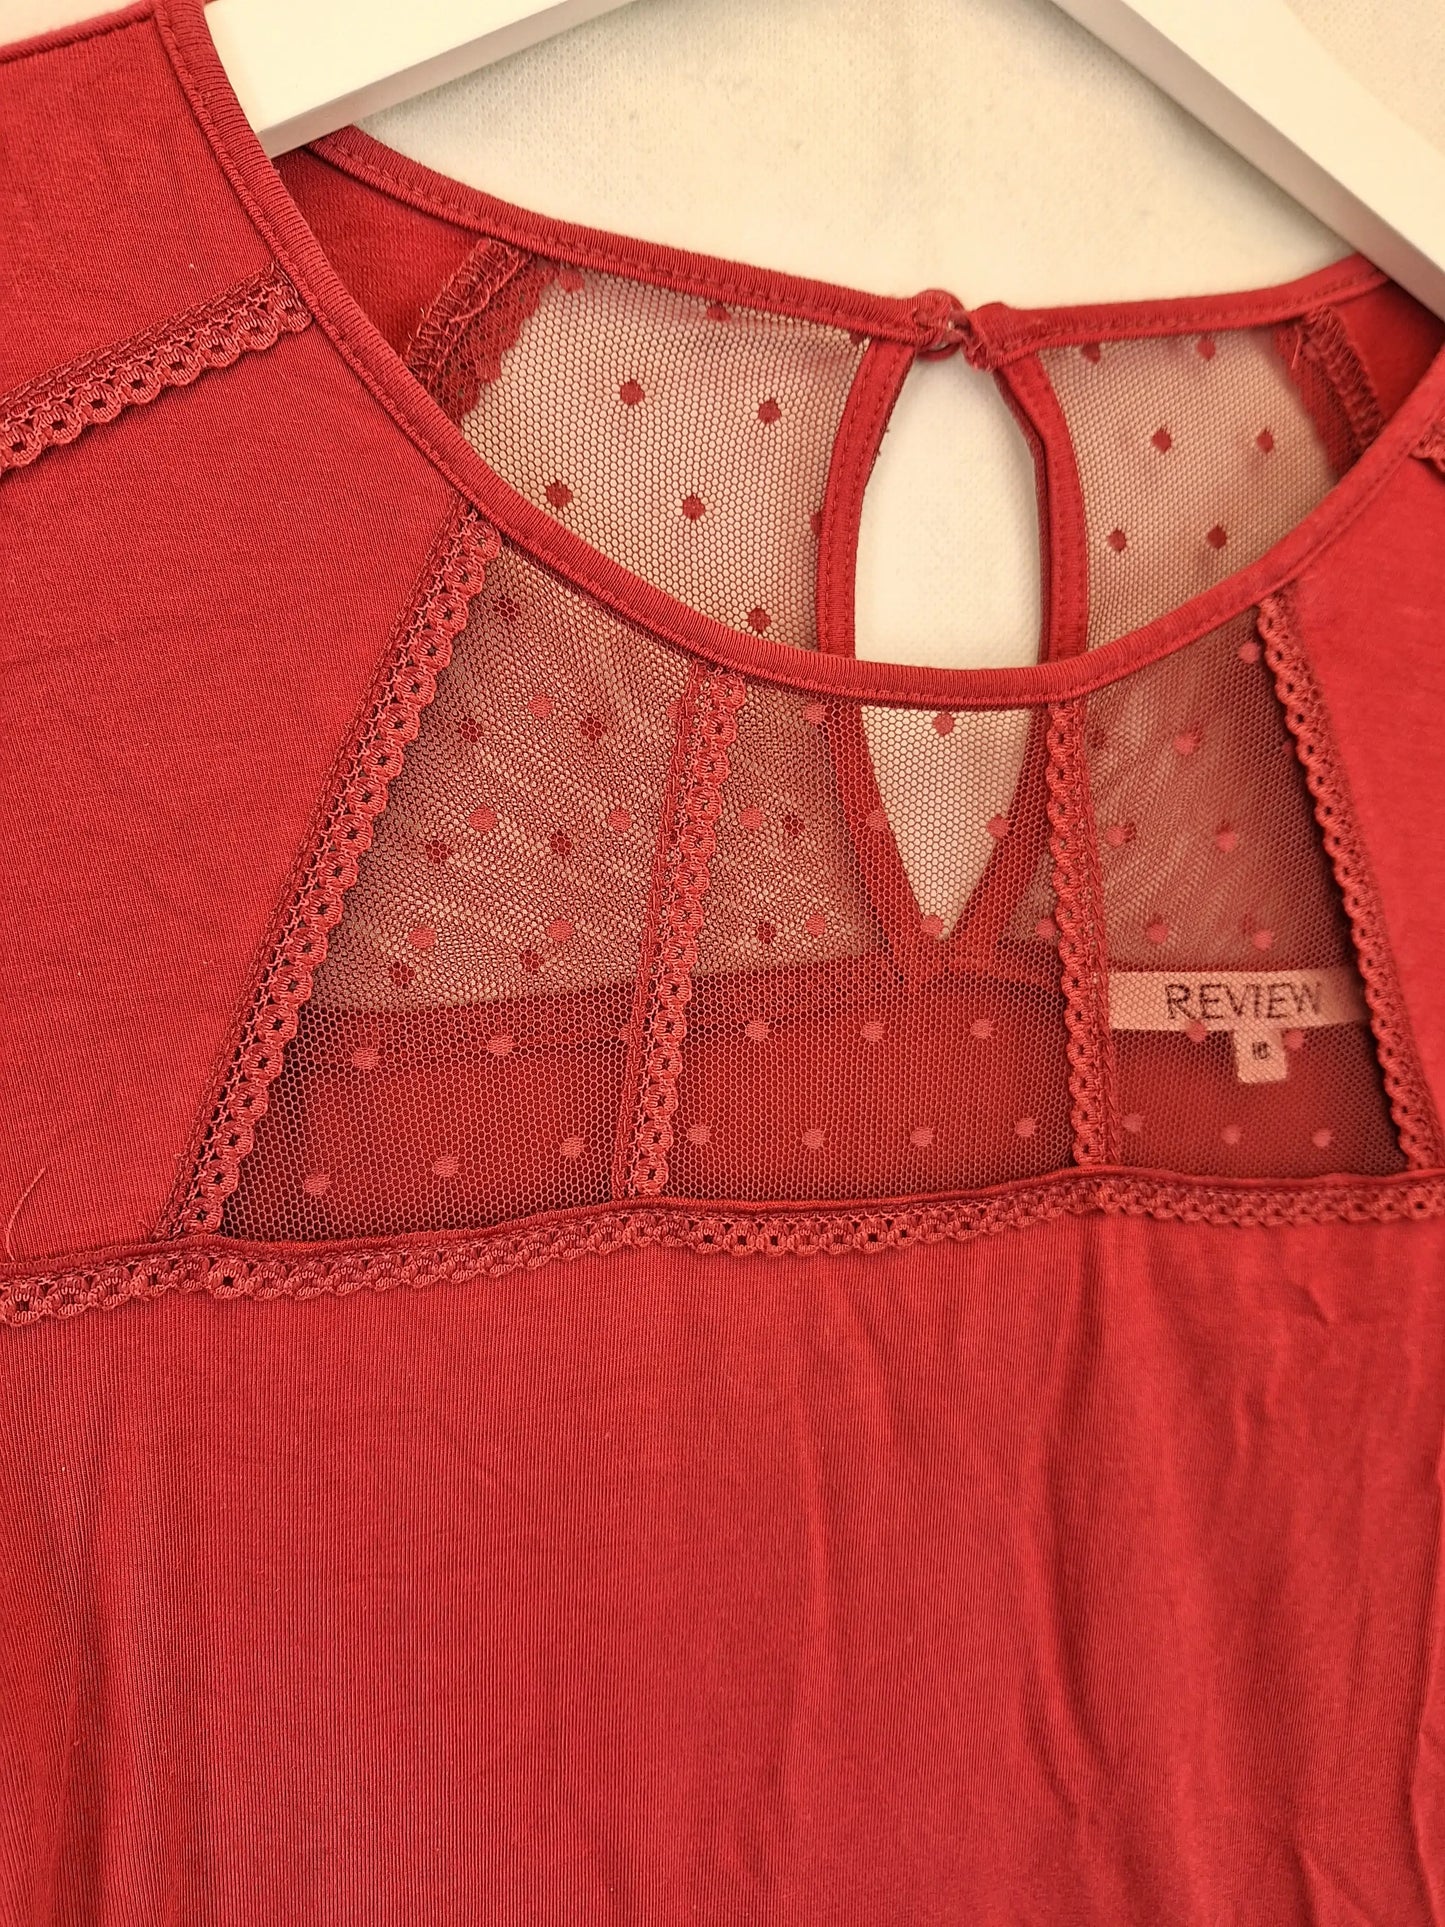 Review Lace Panelled Pretty T-shirt Size 10 by SwapUp-Online Second Hand Store-Online Thrift Store